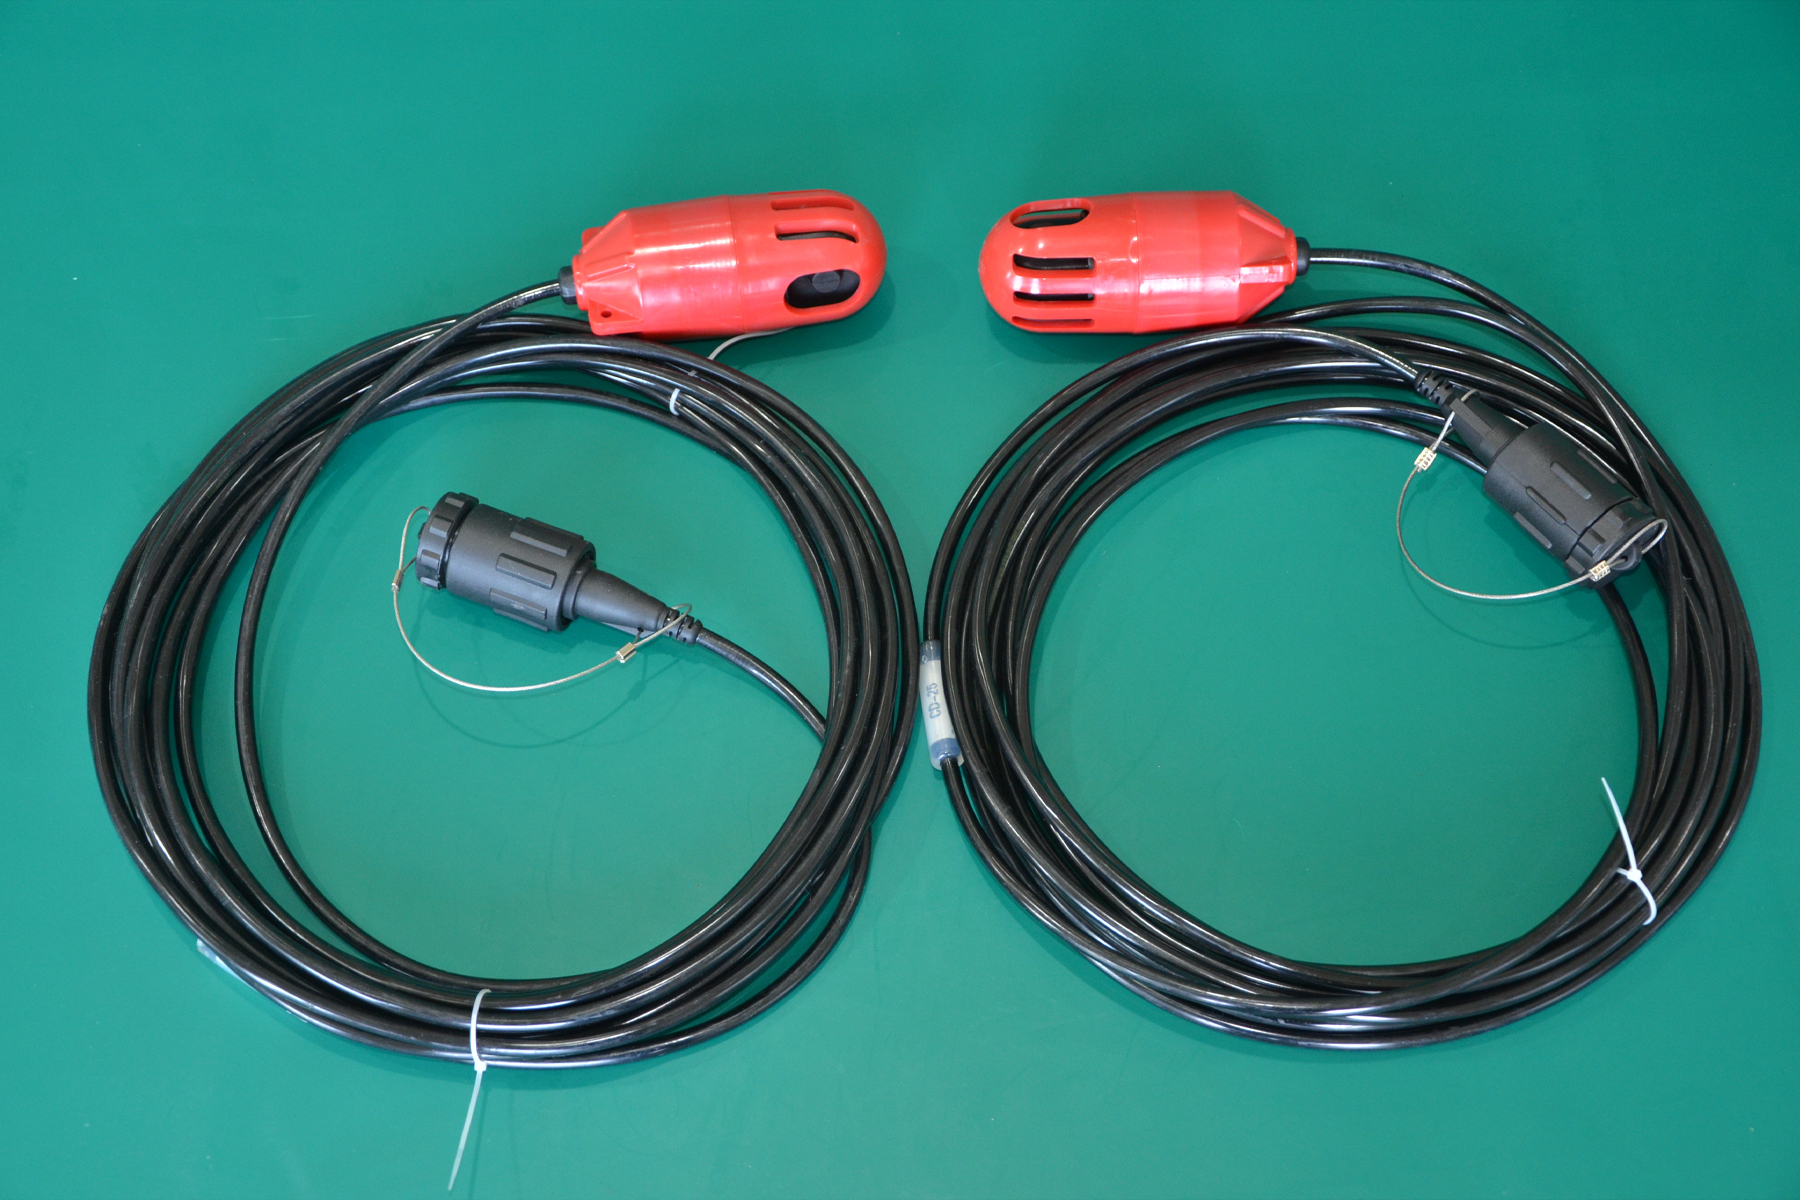 Hydrophone String, geophone source equipment, oil and gas project equipment provaiders, hydrophone string channels